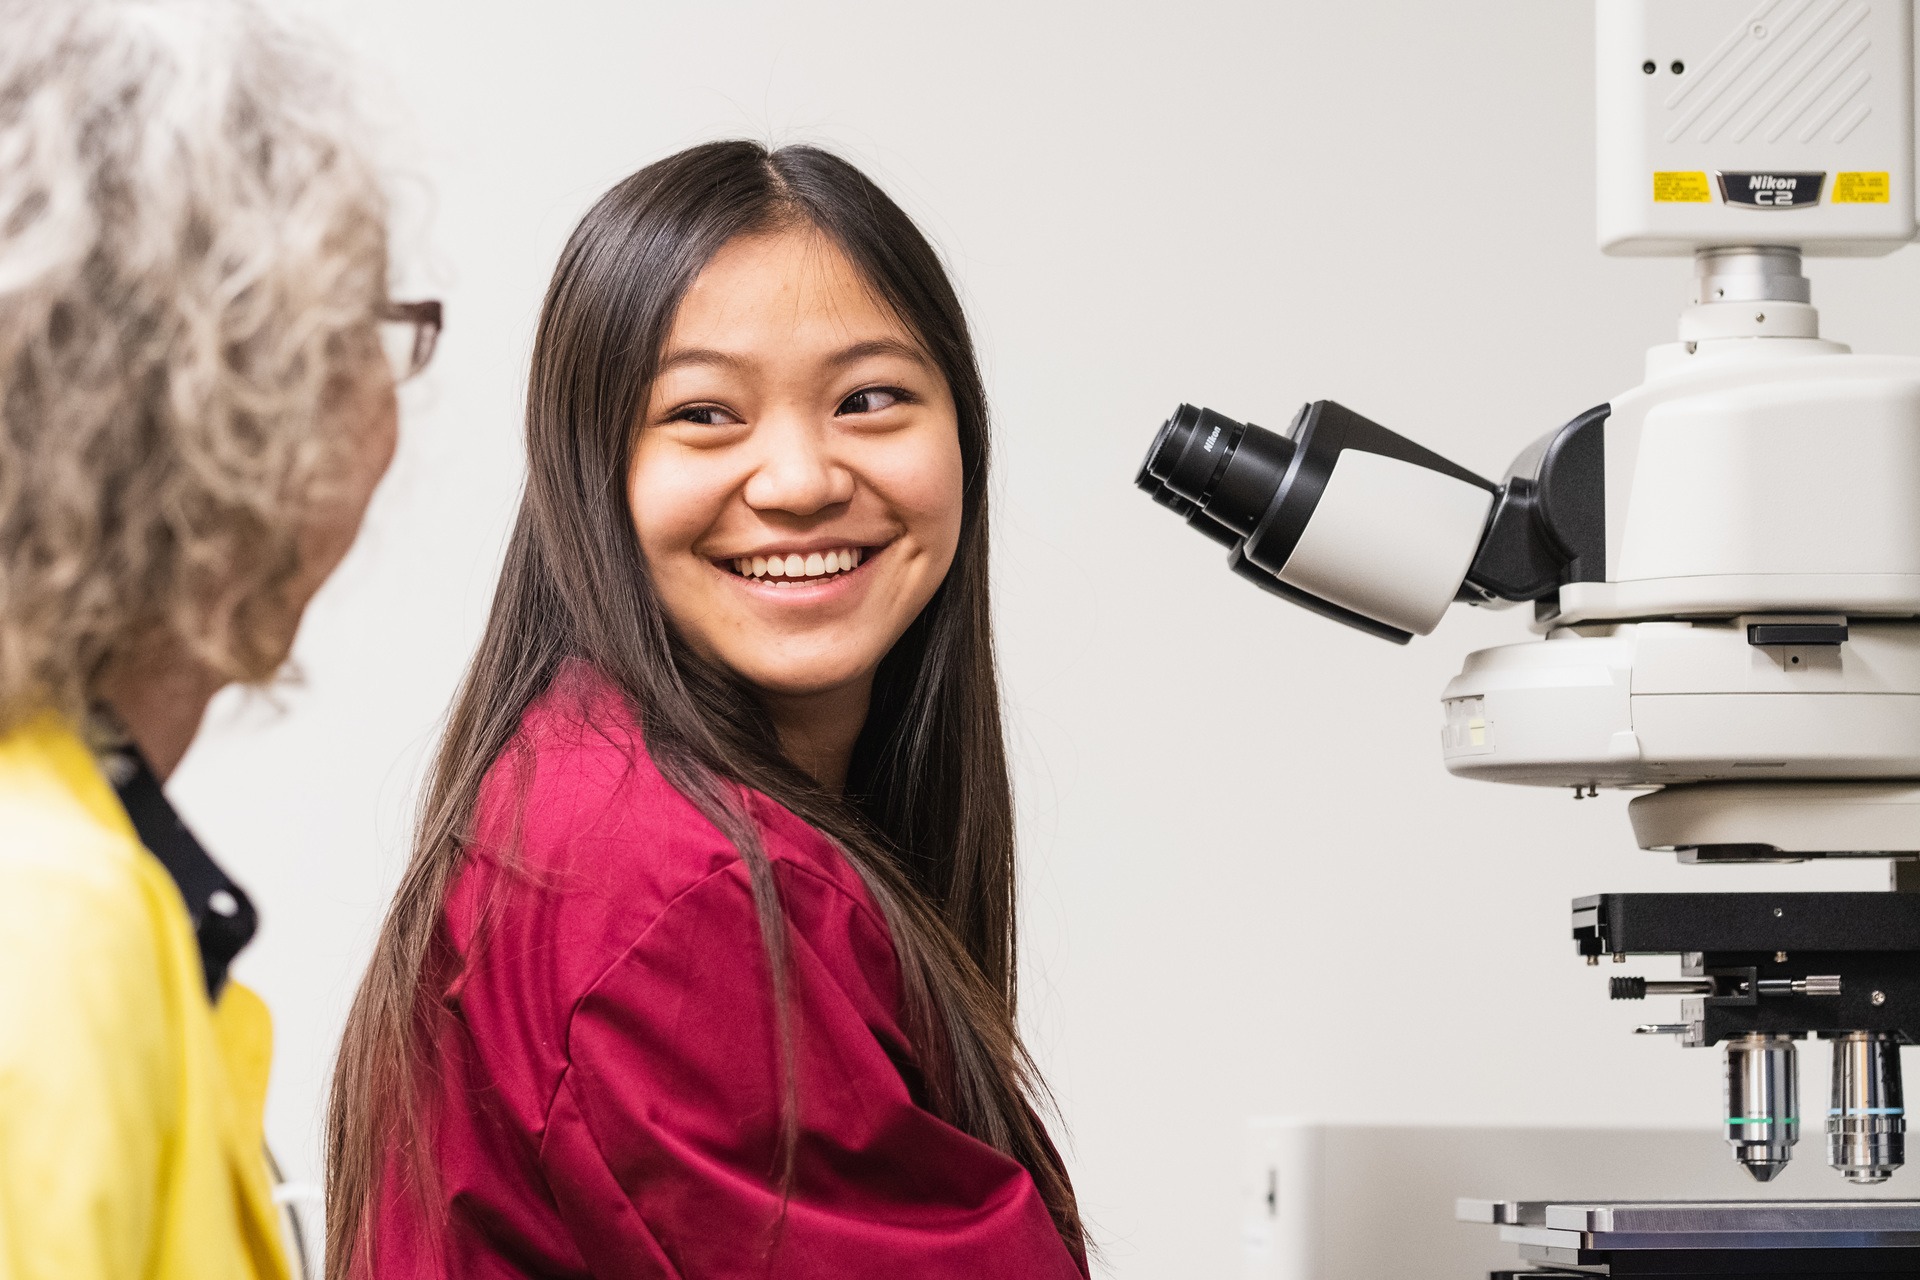 Student sitting in front of a microscope looking at a woman with curly grey hair.